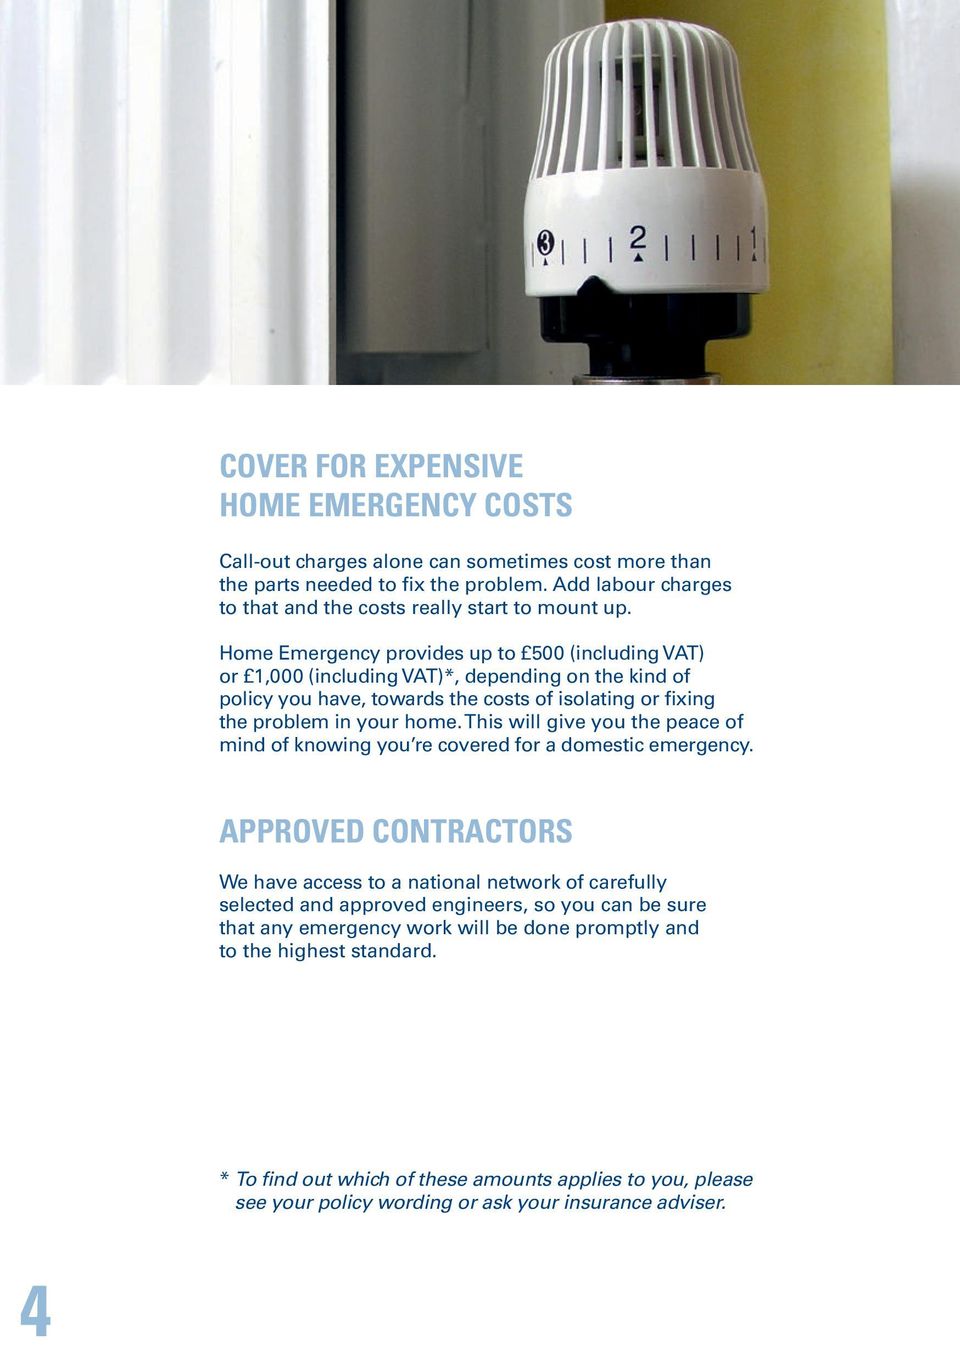 Home Emergency provides up to 500 (including VAT) or 1,000 (including VAT)*, depending on the kind of policy you have, towards the costs of isolating or fixing the problem in your home.